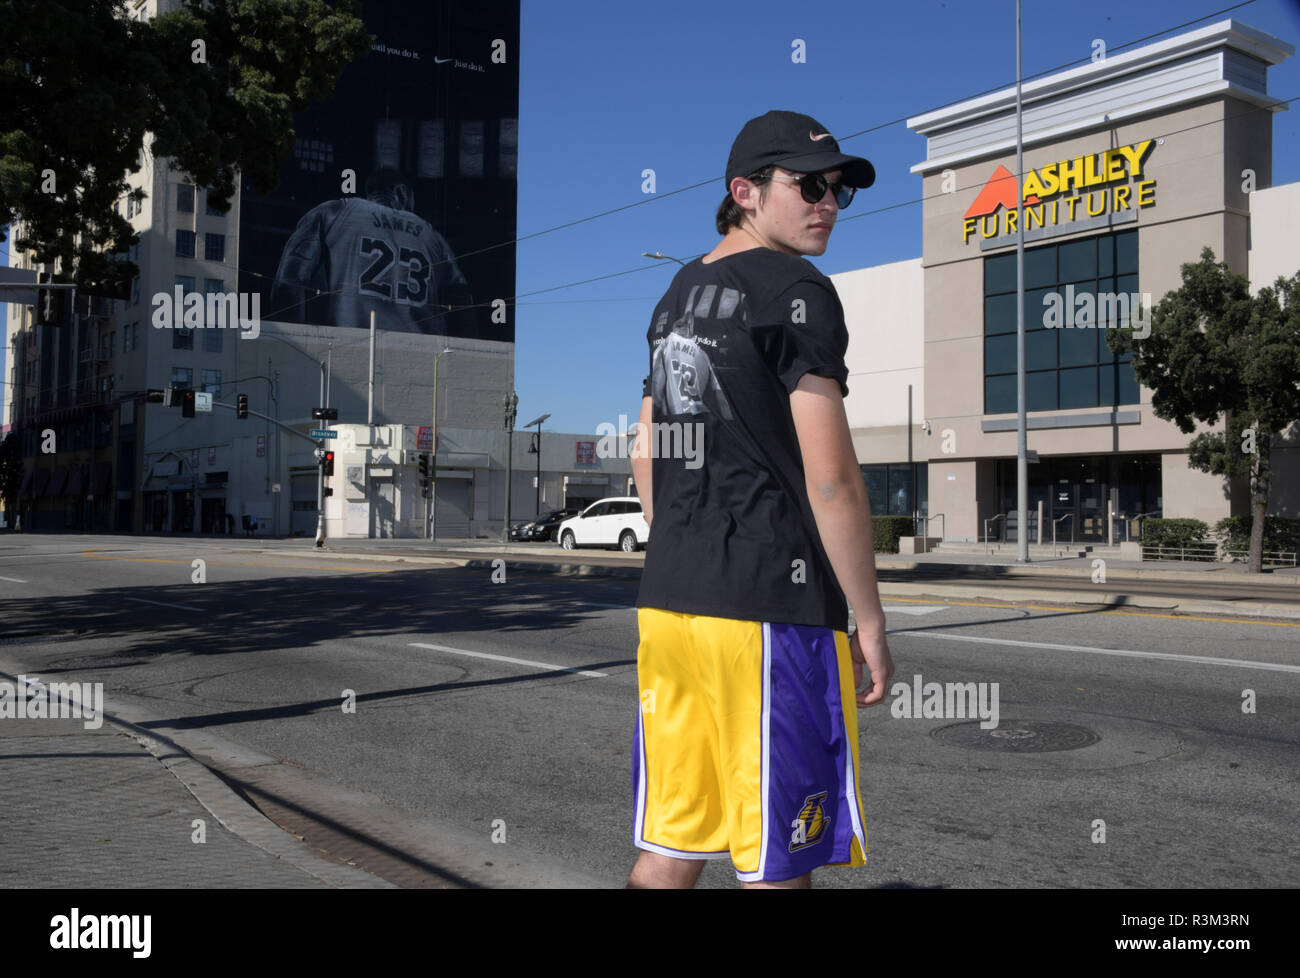 Los Angeles, United States. 02nd Nov, 2018. Dylan Stewart of Riverside,  Calif. poses in front of Nike ad featuring Los Angeles Lakers forward  LeBron James to commemorate the 30th anniversary of the "